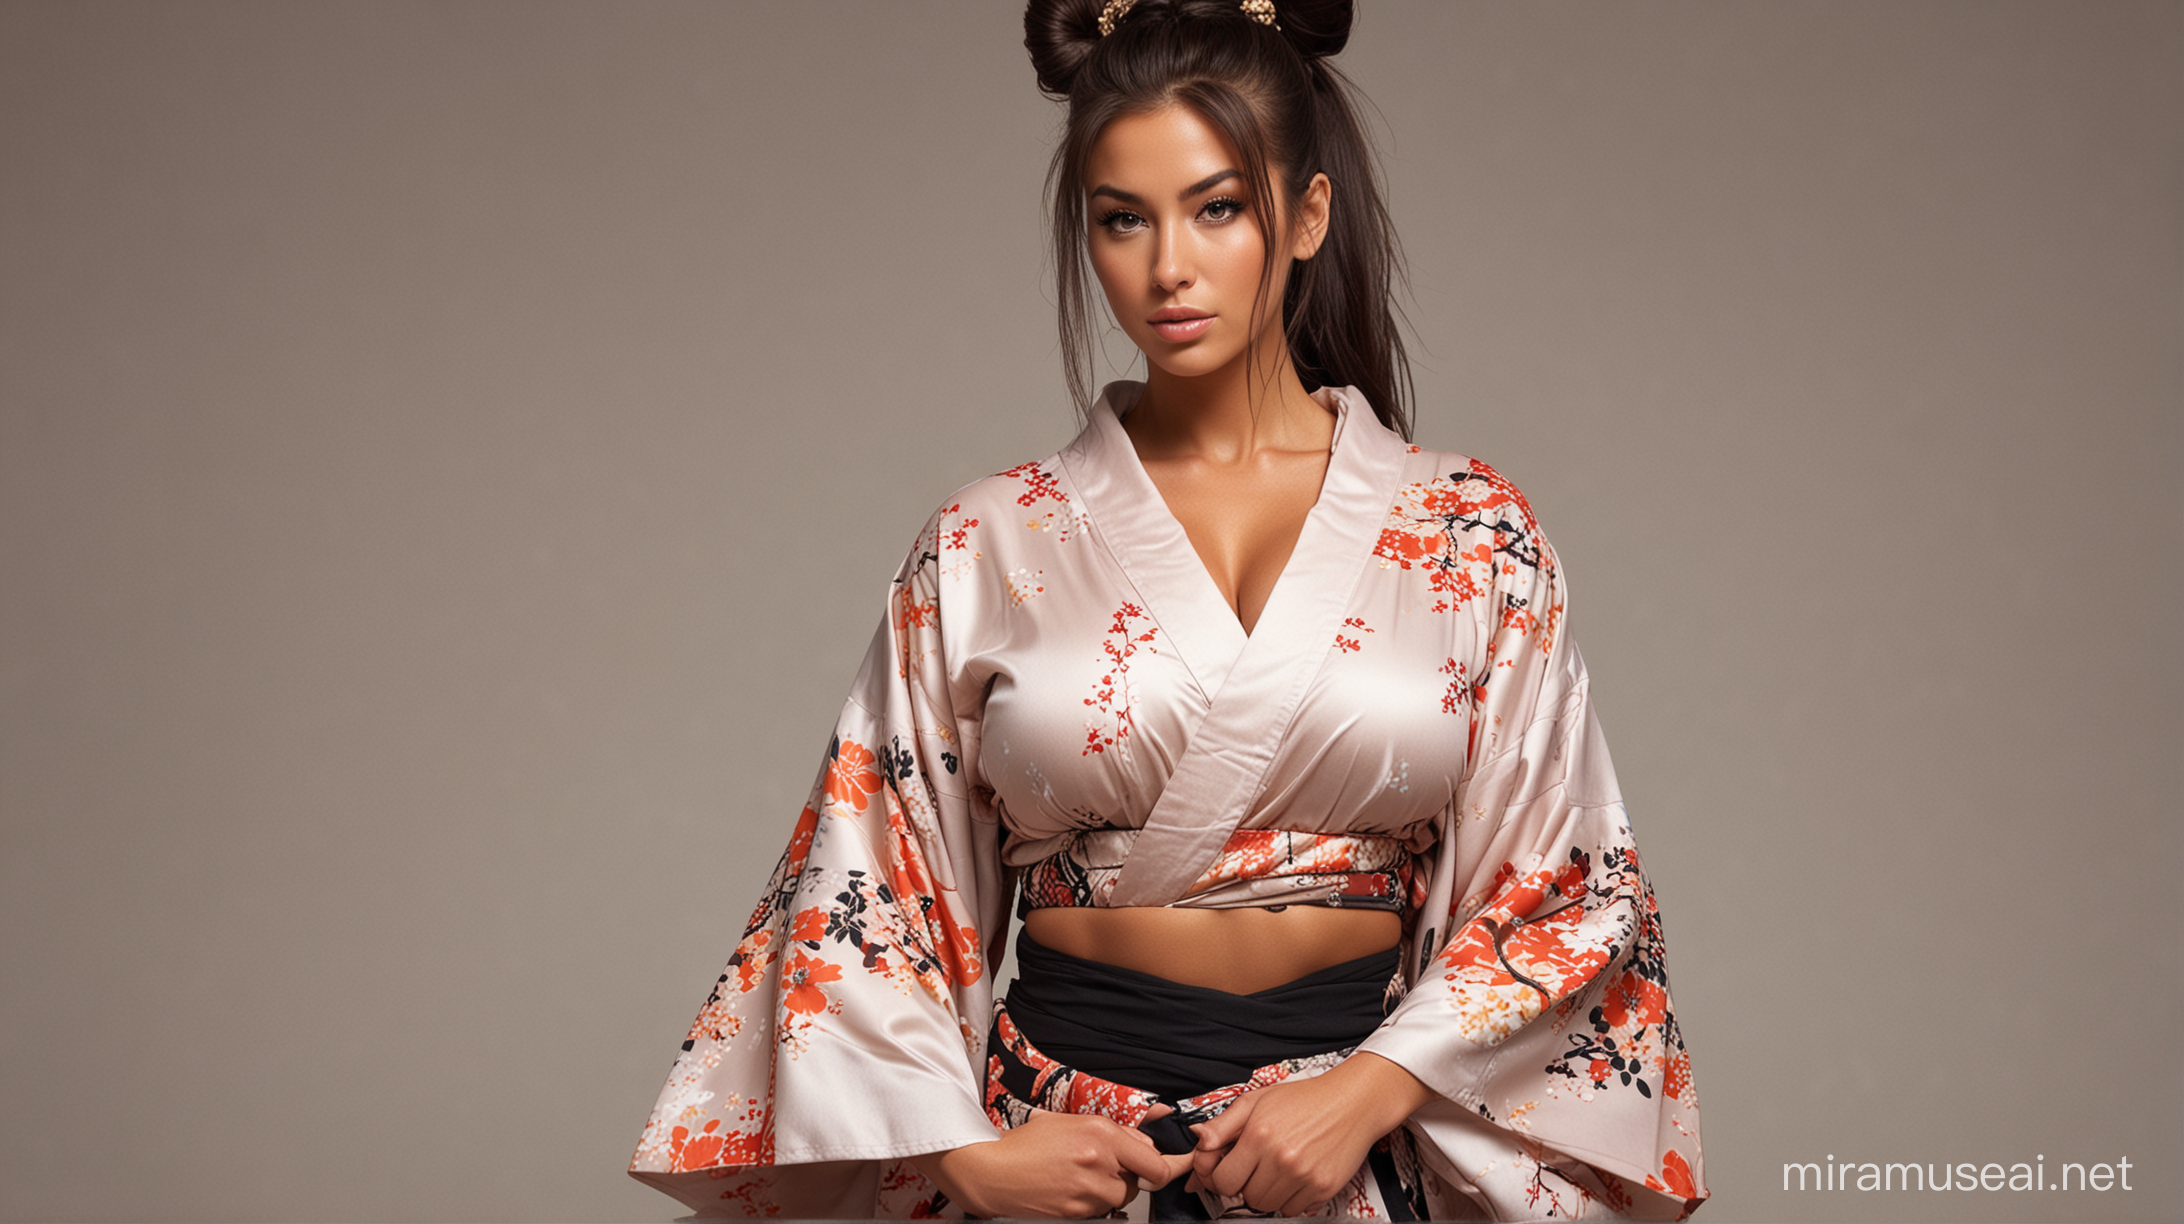 Seductive Giantess with Muscular Physique and Kimono Sleeves